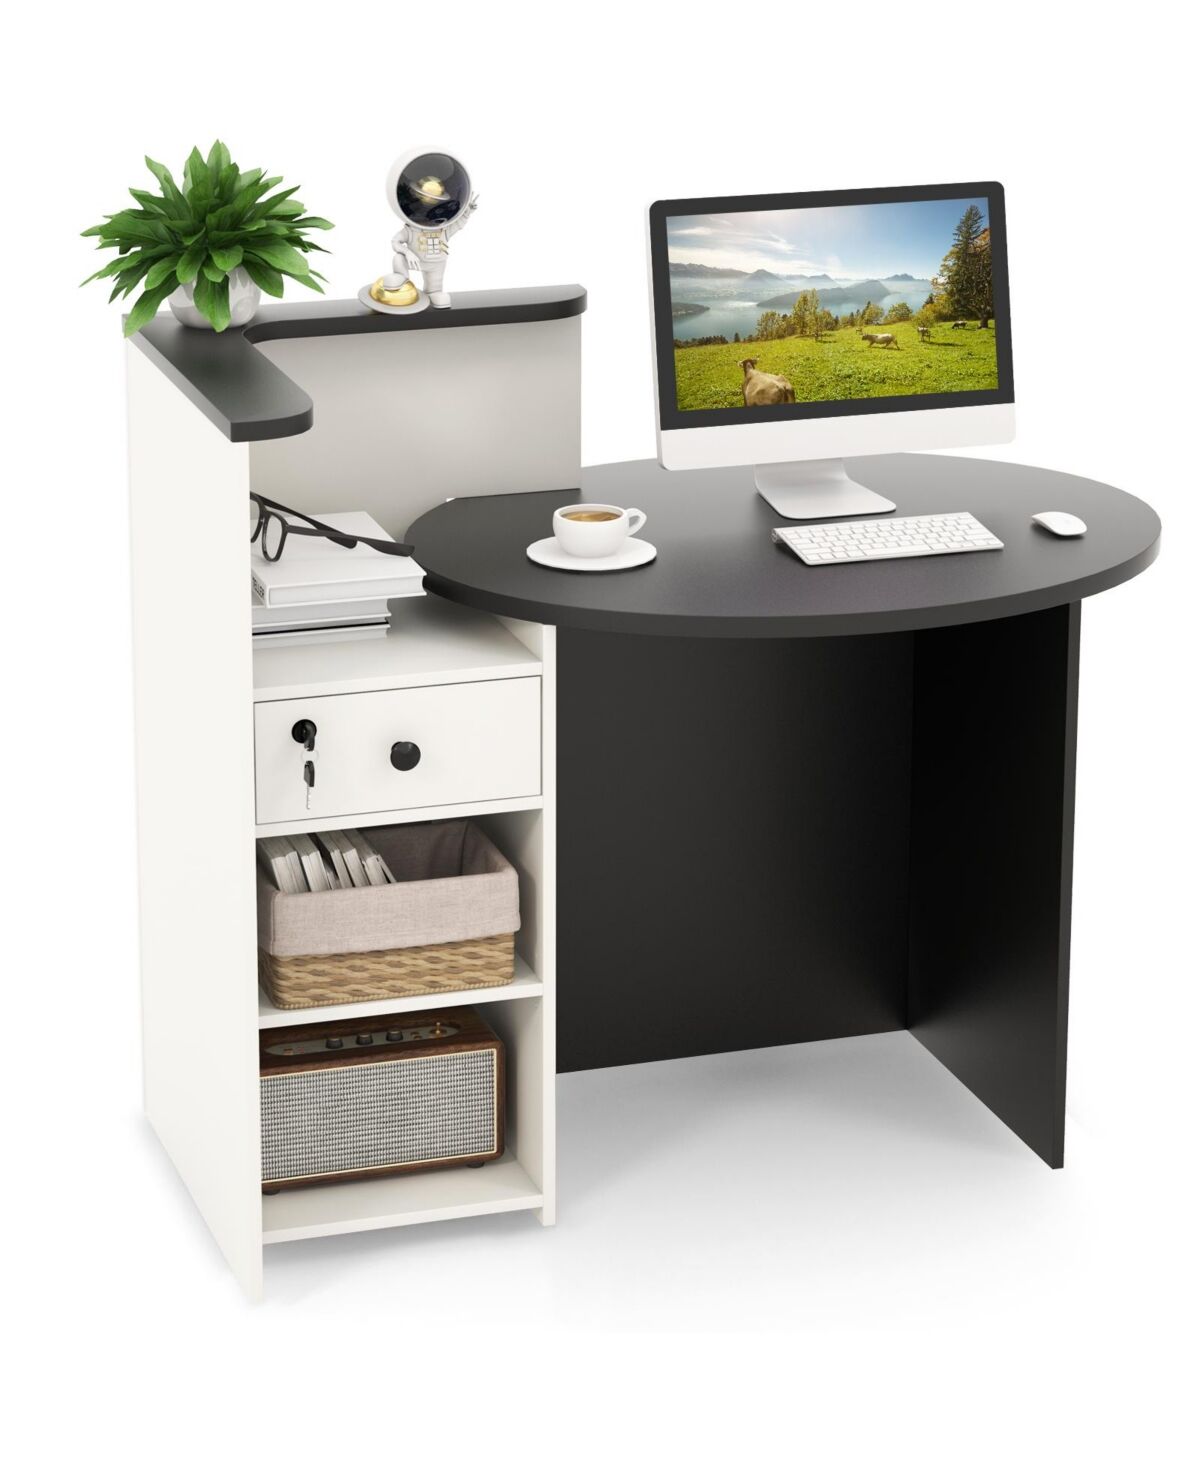 Slickblue Front Reception Office Desk with Open Shelf and Lockable Drawer-Black & White - Black,White